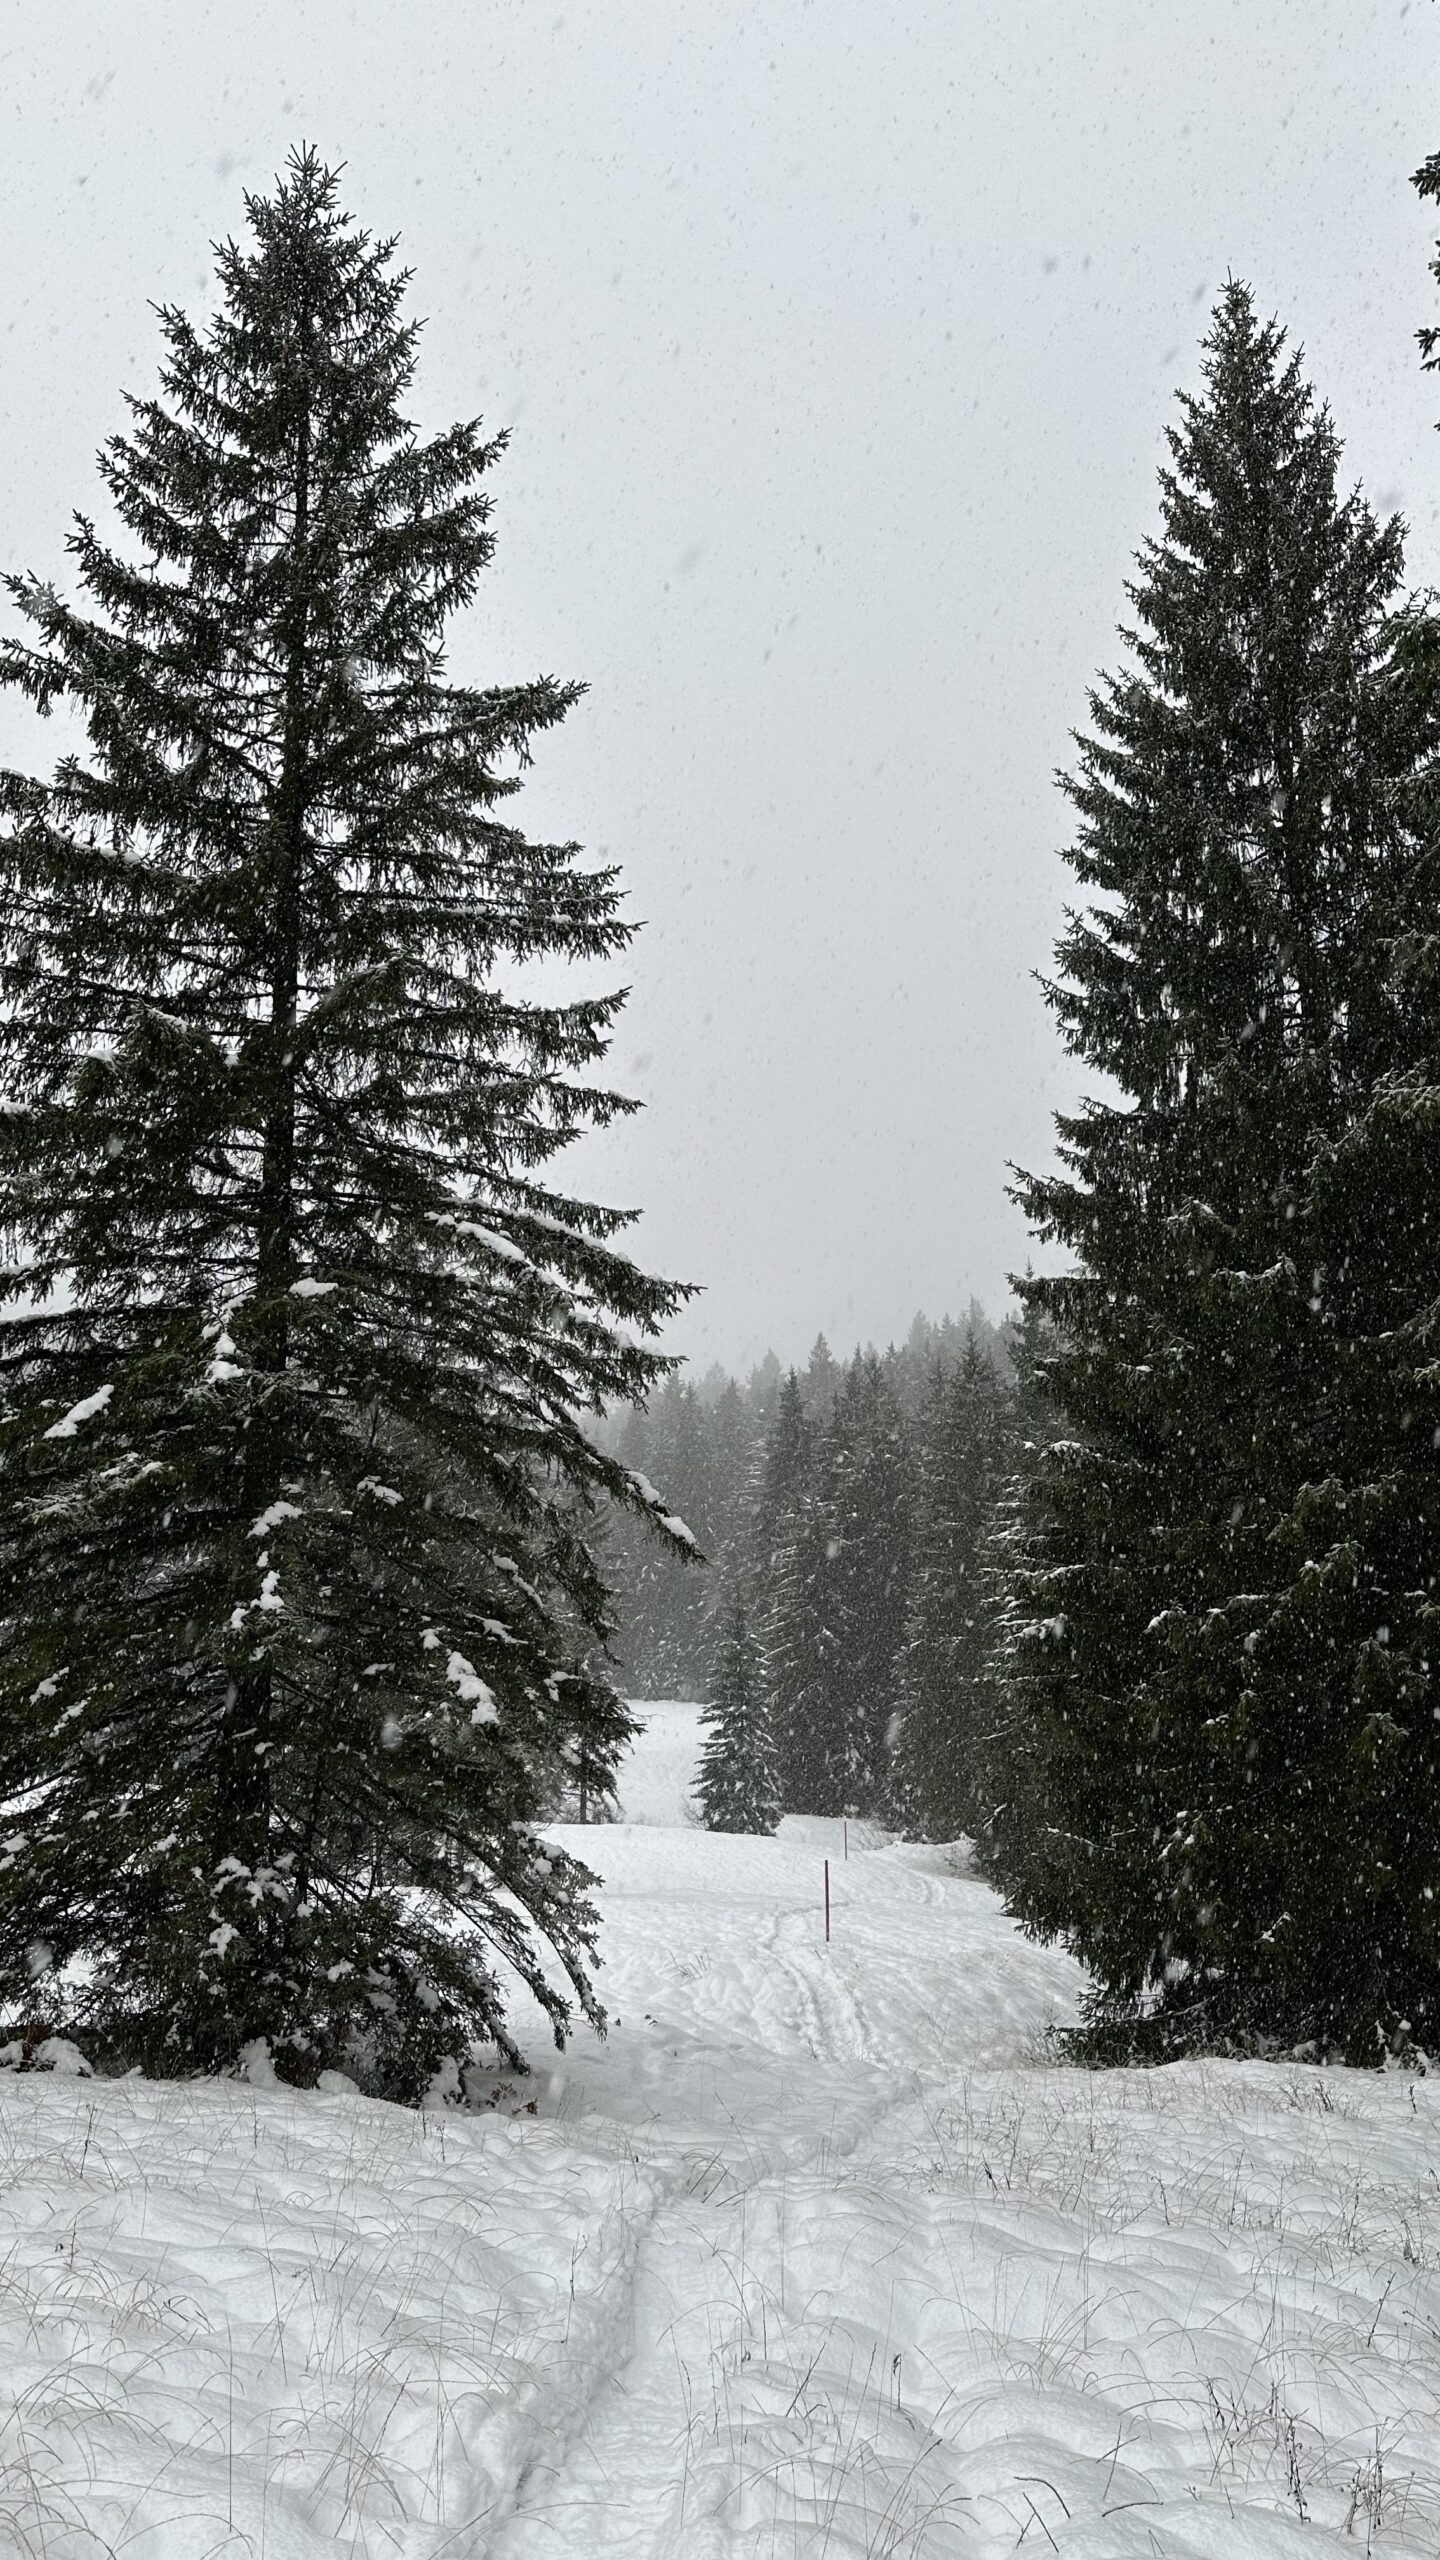 A snowy path leads between two evergreen trees. The sky is overcast and it is snowing.